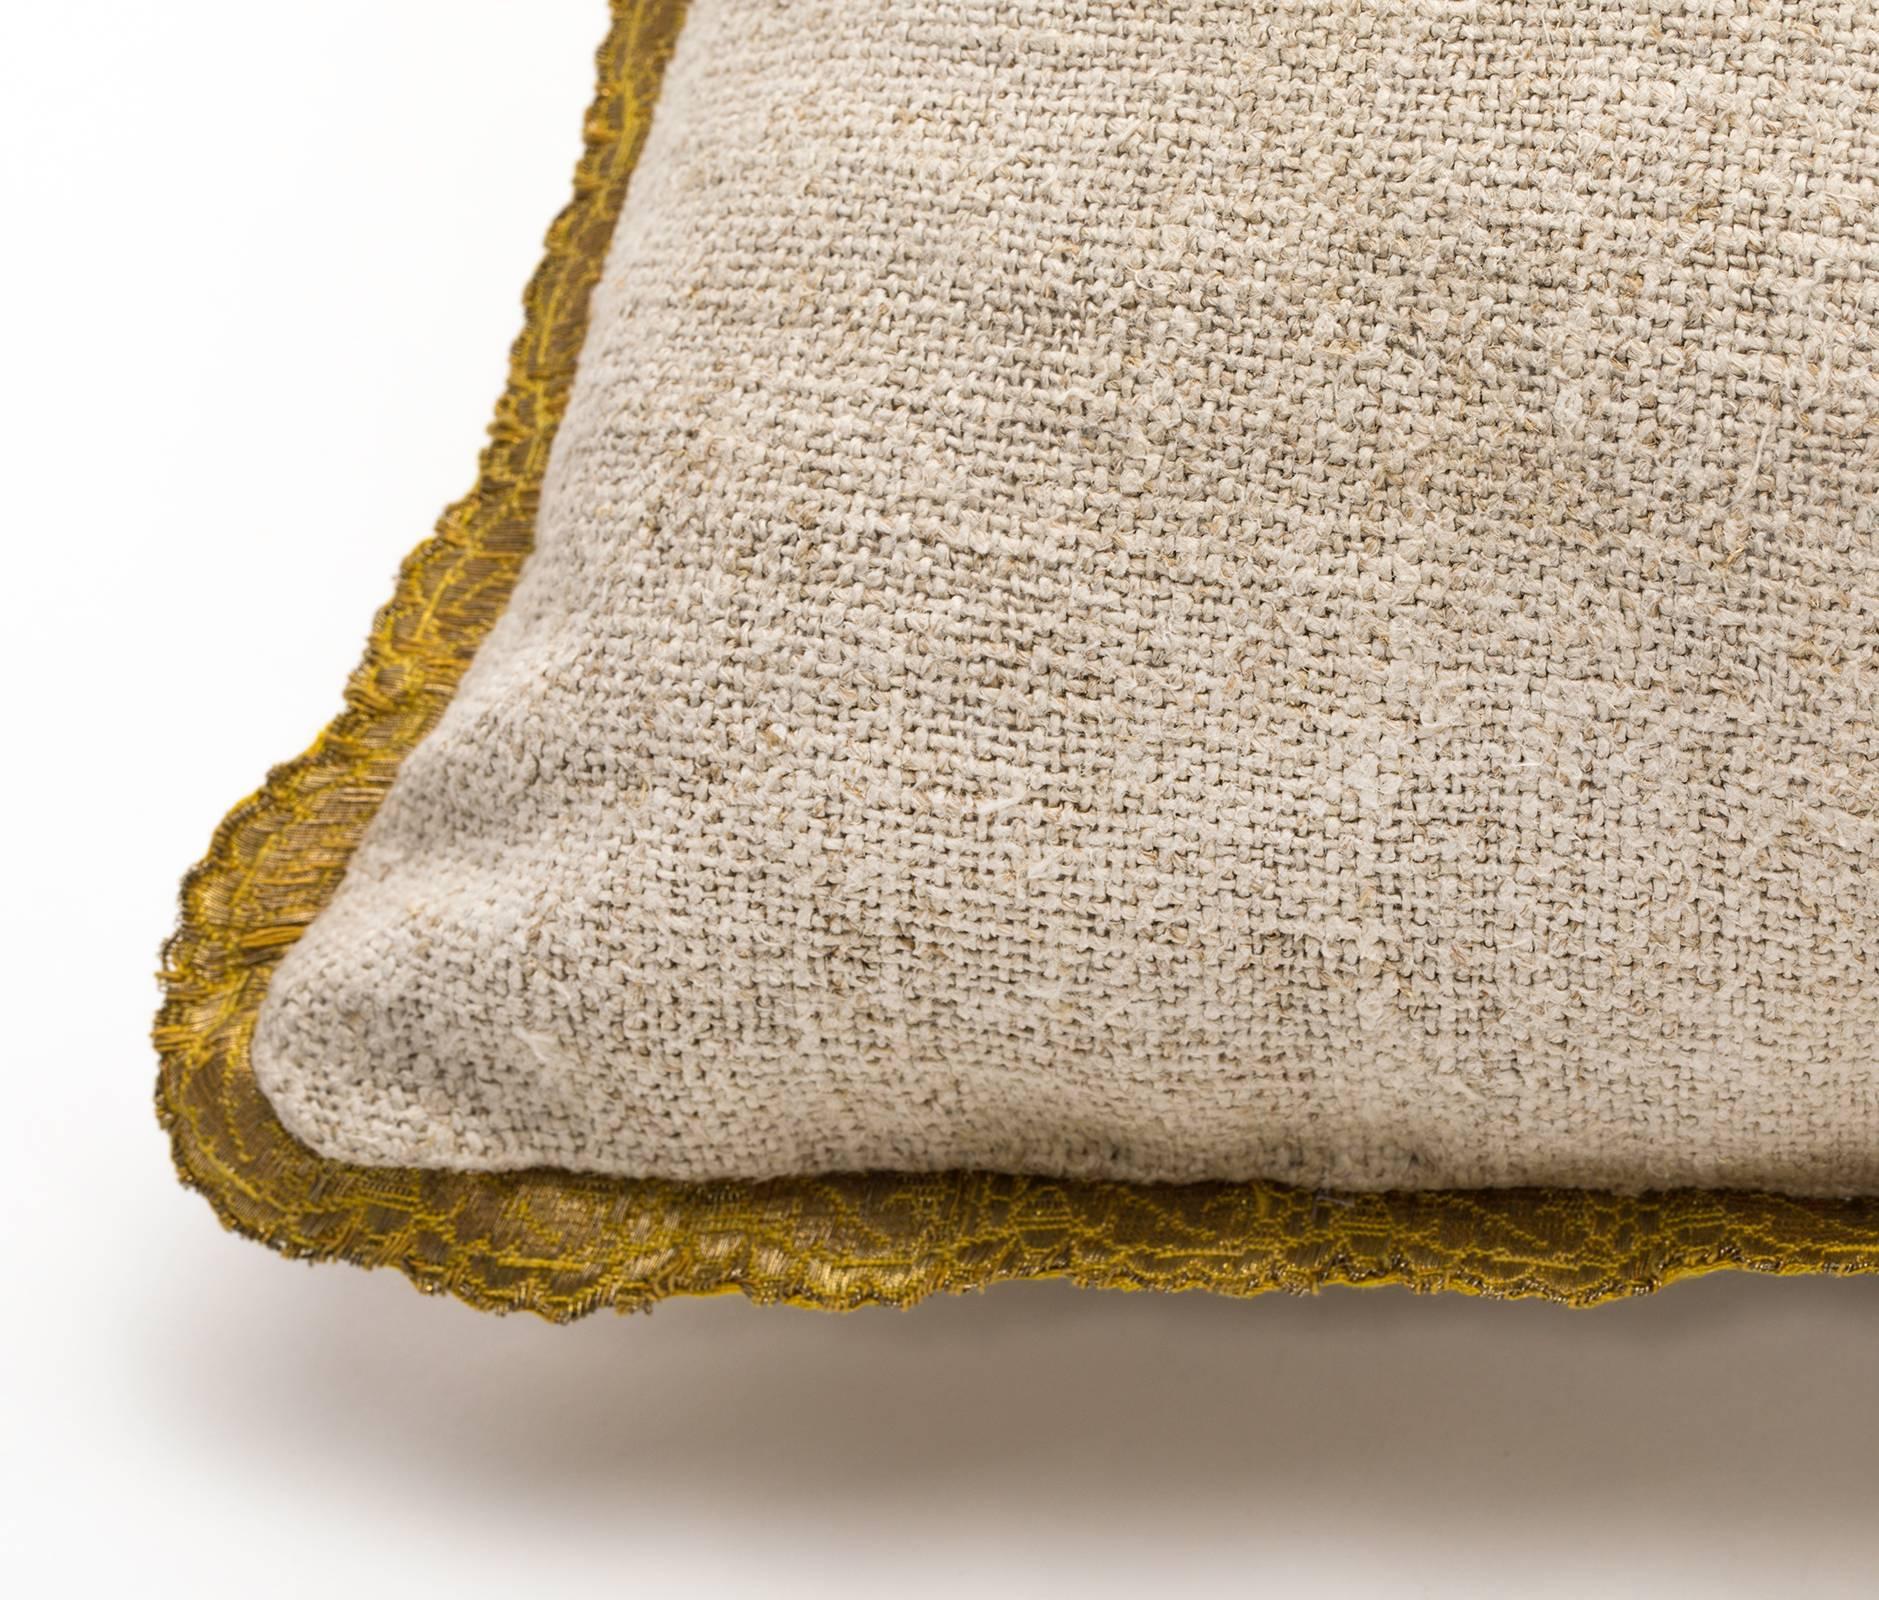 Pillow, Antique Metallic Gold Appliqué on Linen  In Excellent Condition For Sale In Summerland, CA